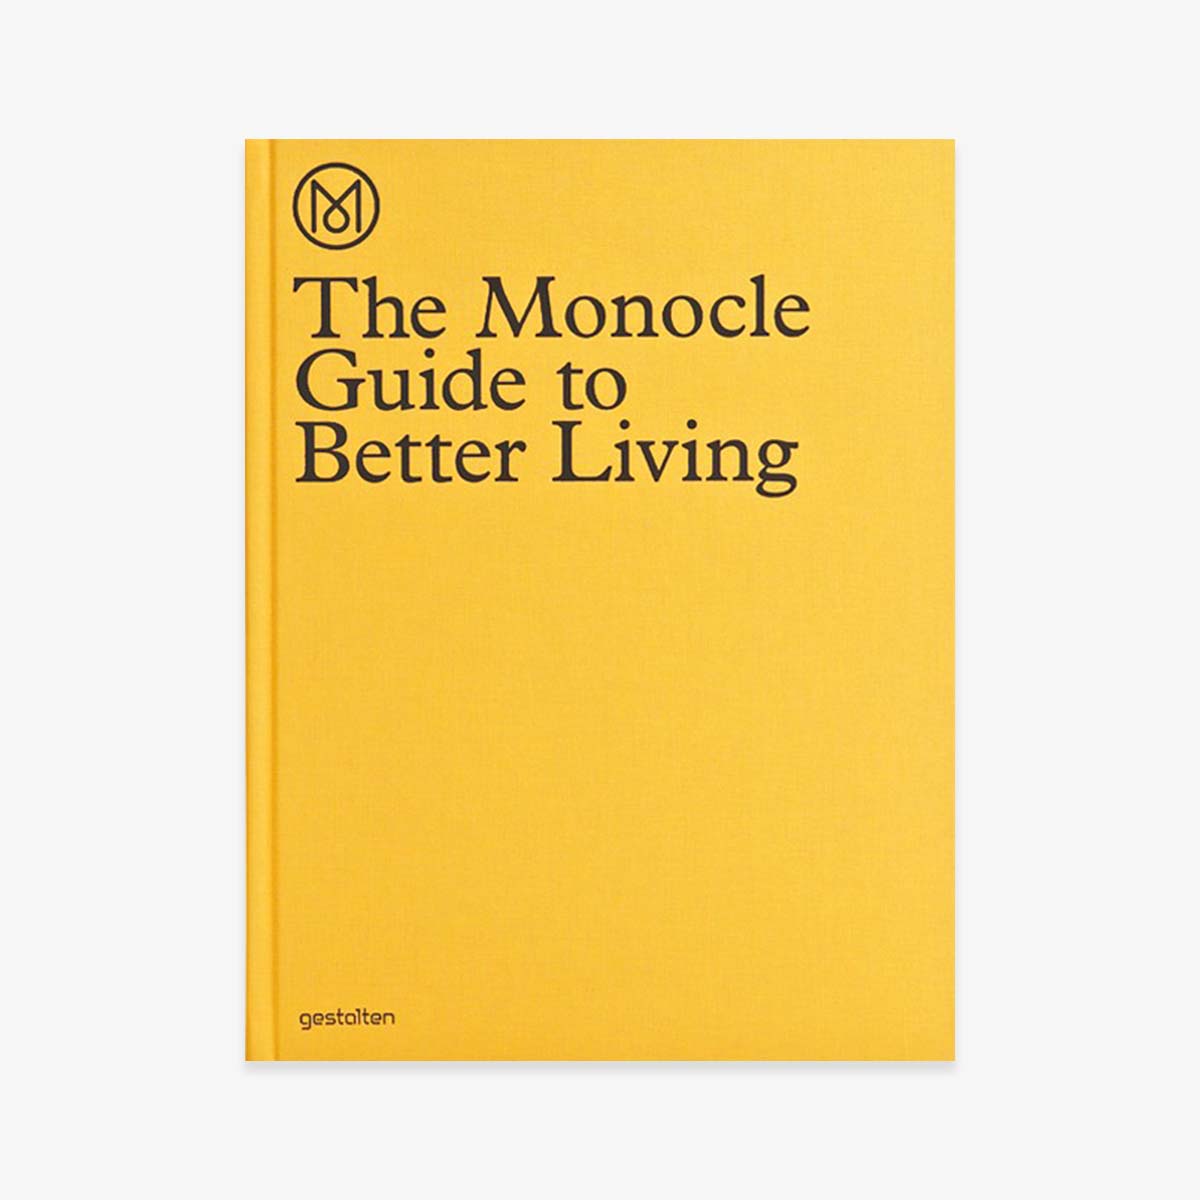 BOOK 'THE MONOCLE GUIDE TO BETTER LIVING'